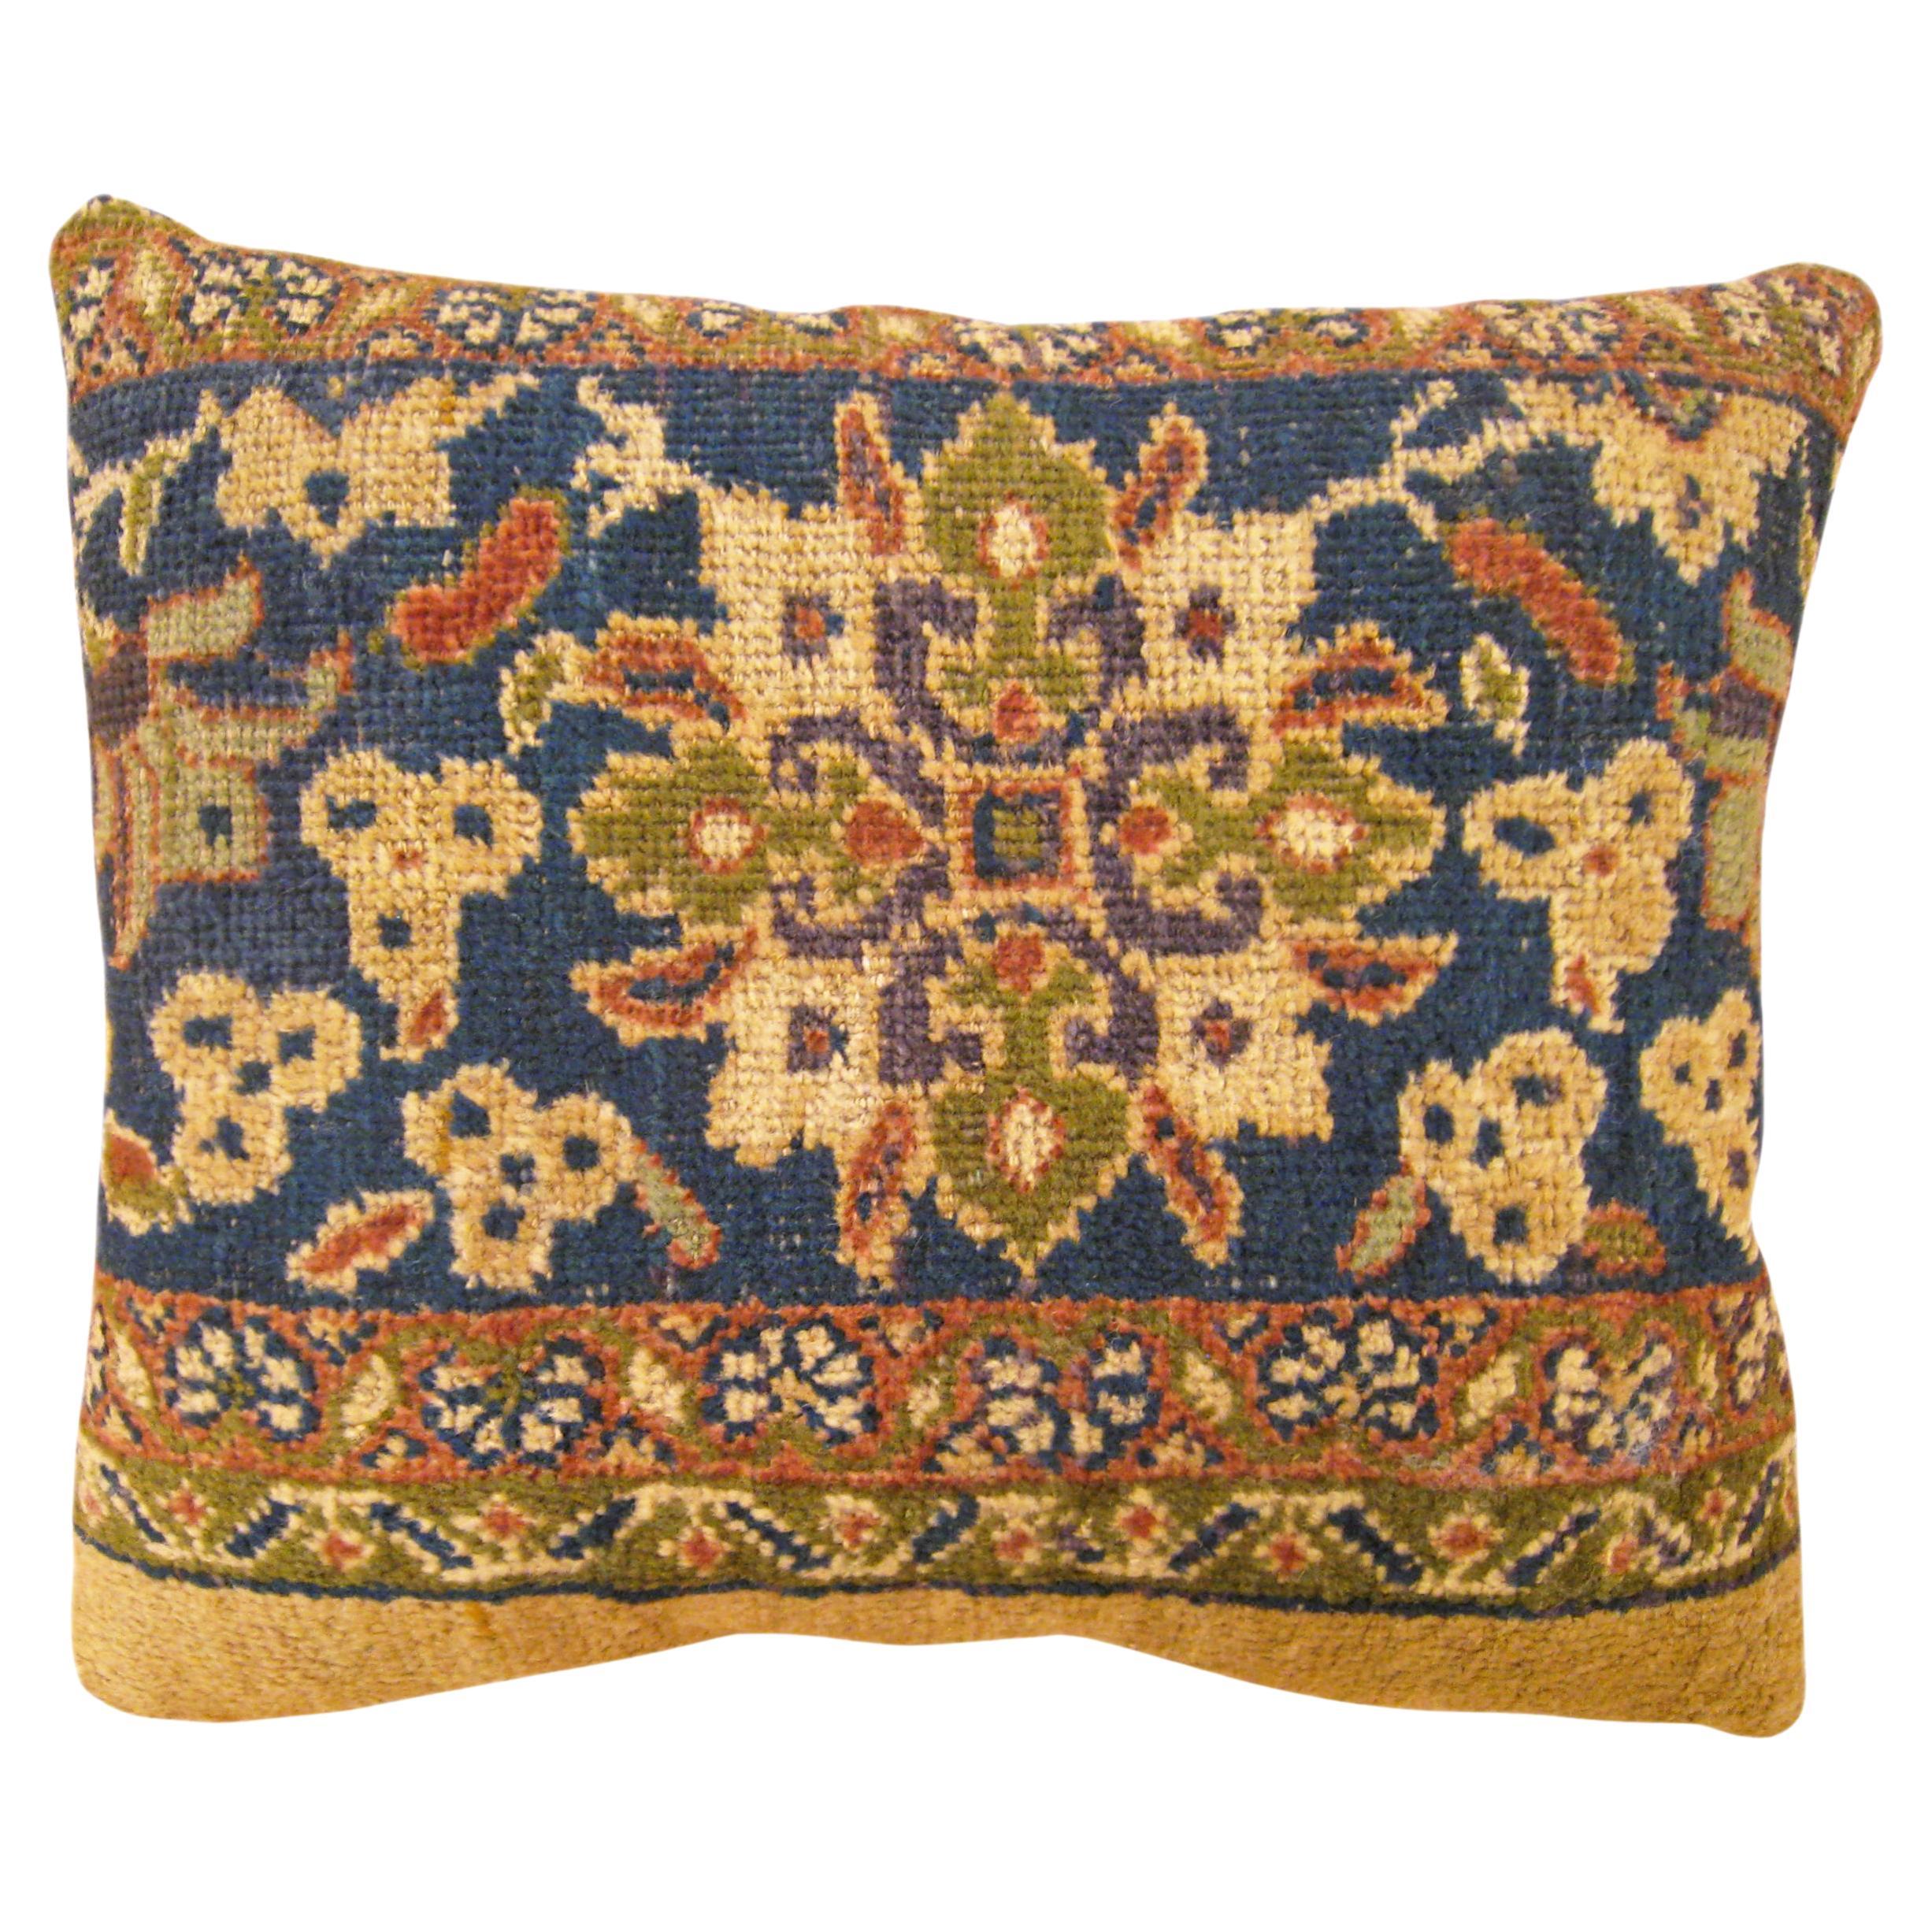 Decorative Antique Persian Sultanabad Carpet Pillow with Floral Elements